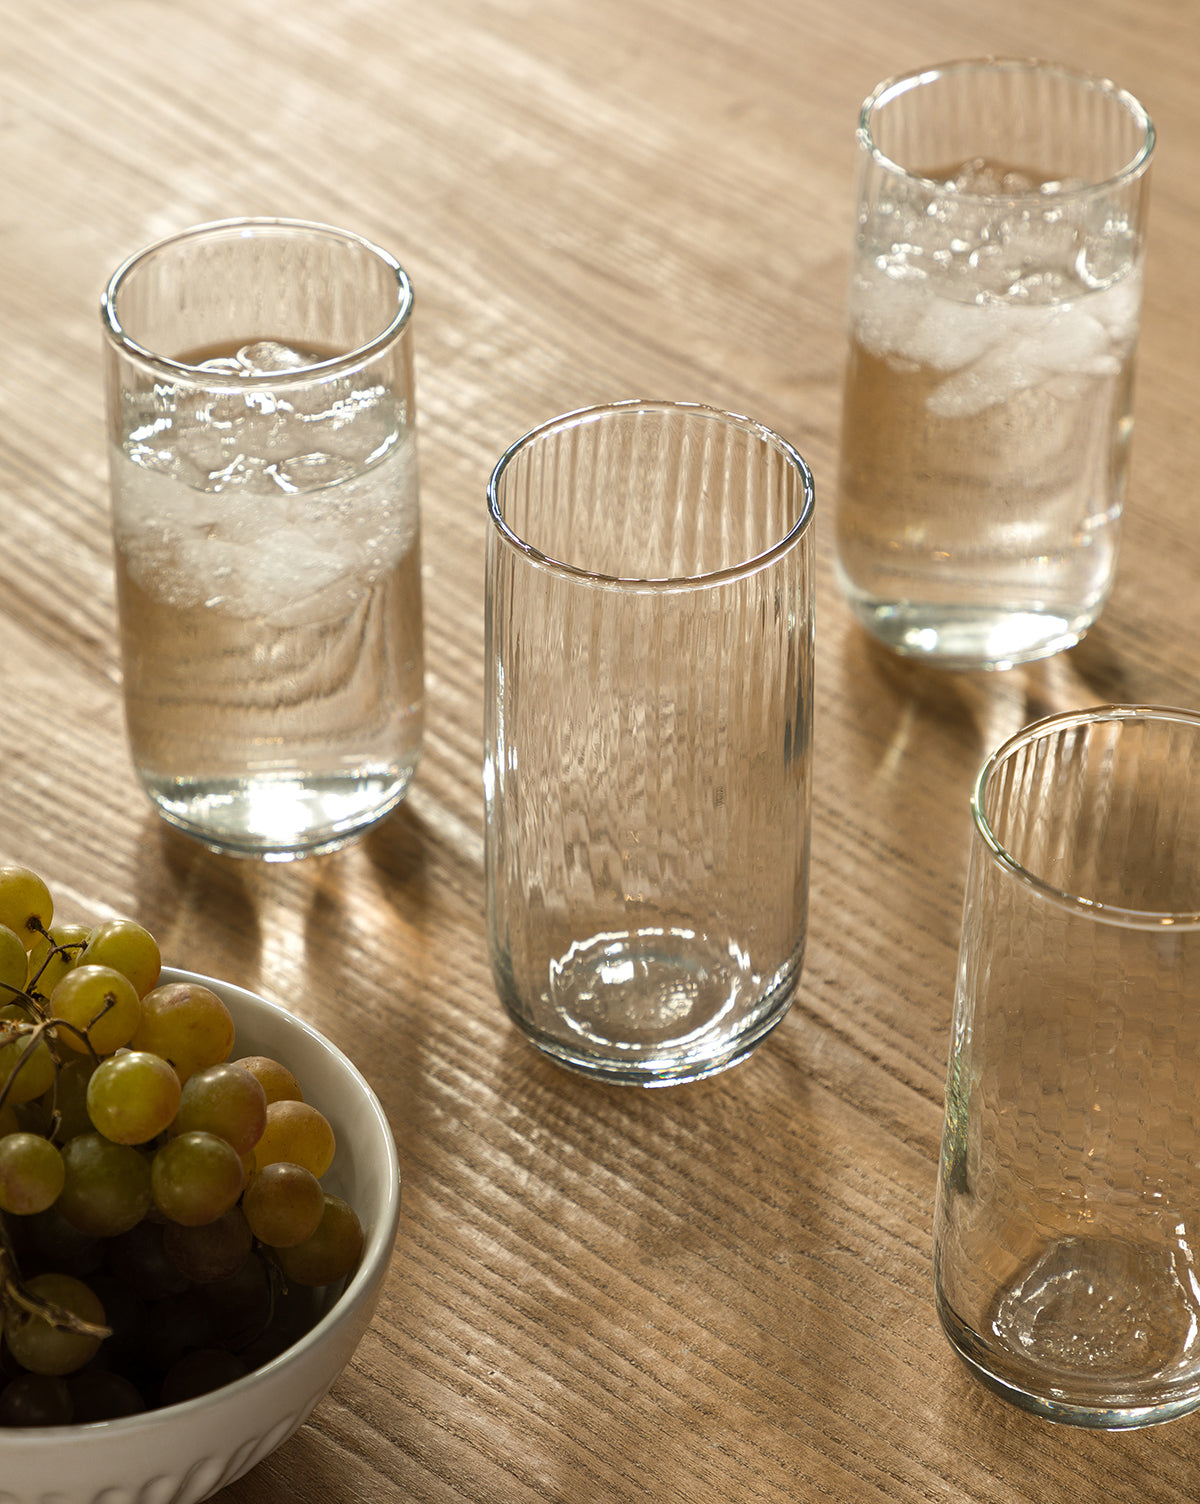 Transparent Overseas, Ribbed Tall Drinking Glasses (Set of 4)